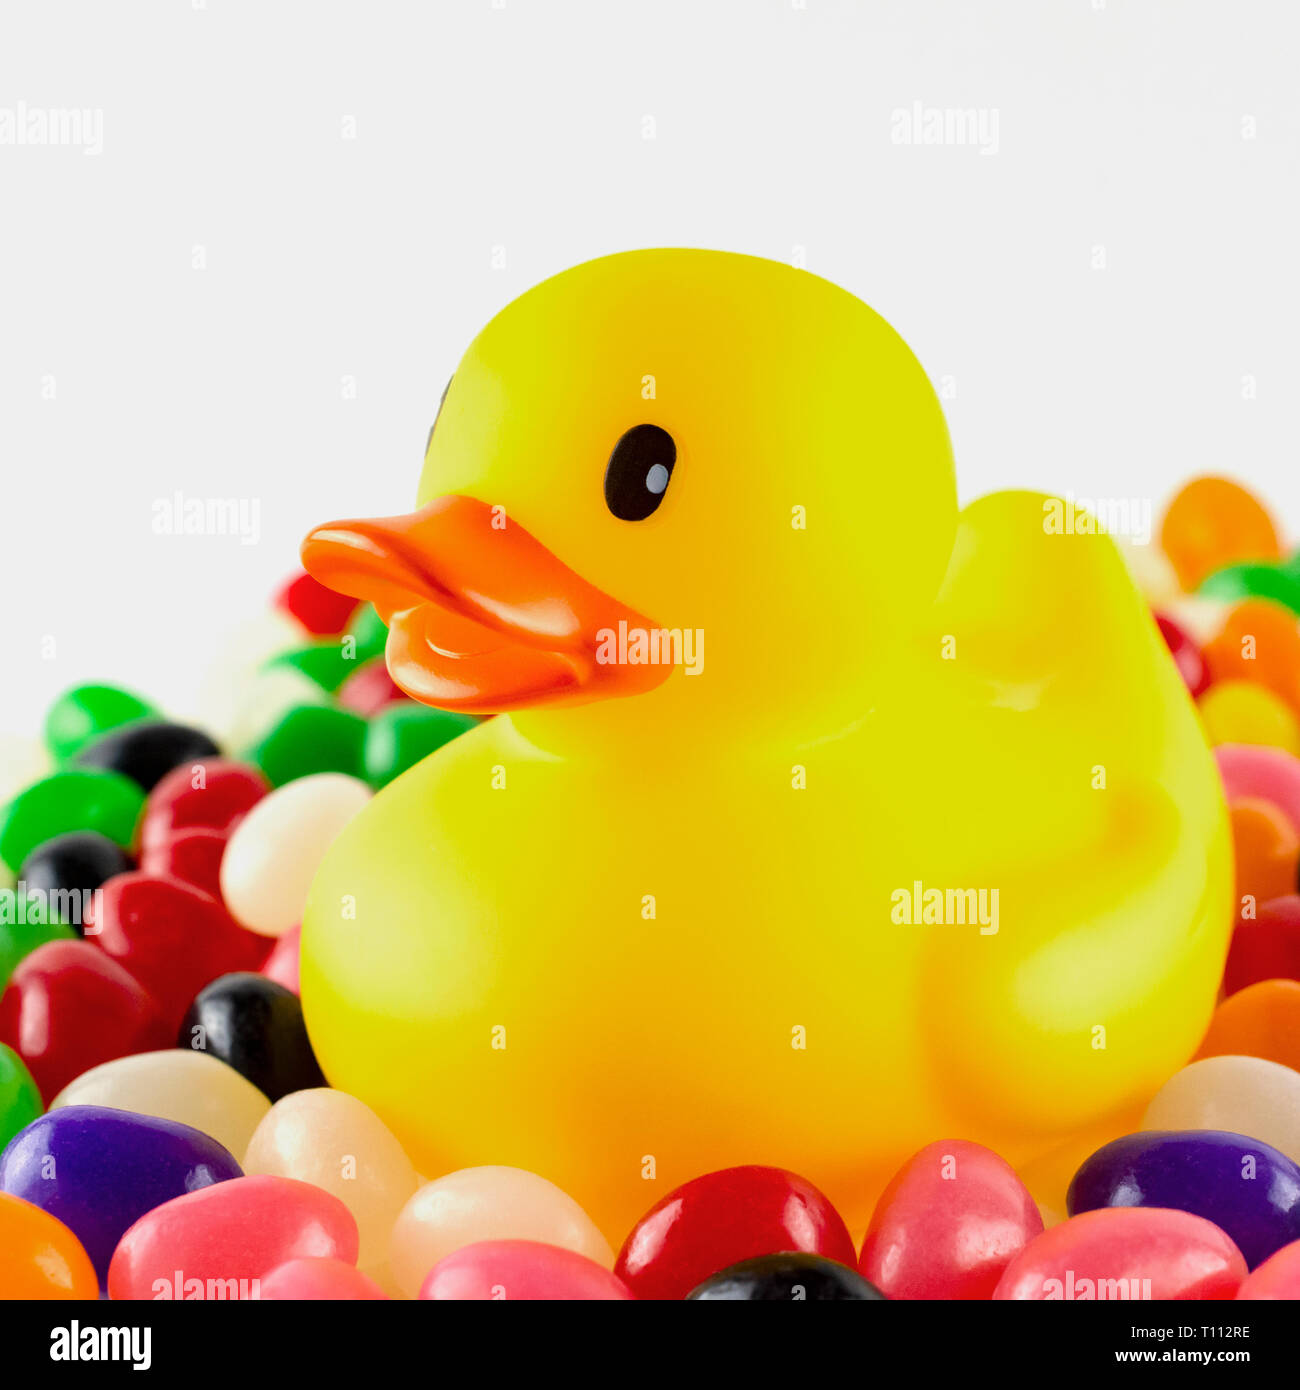 Close up of a toy rubber duck surrounded by jelly beans against  a white background.  Square crop. Stock Photo